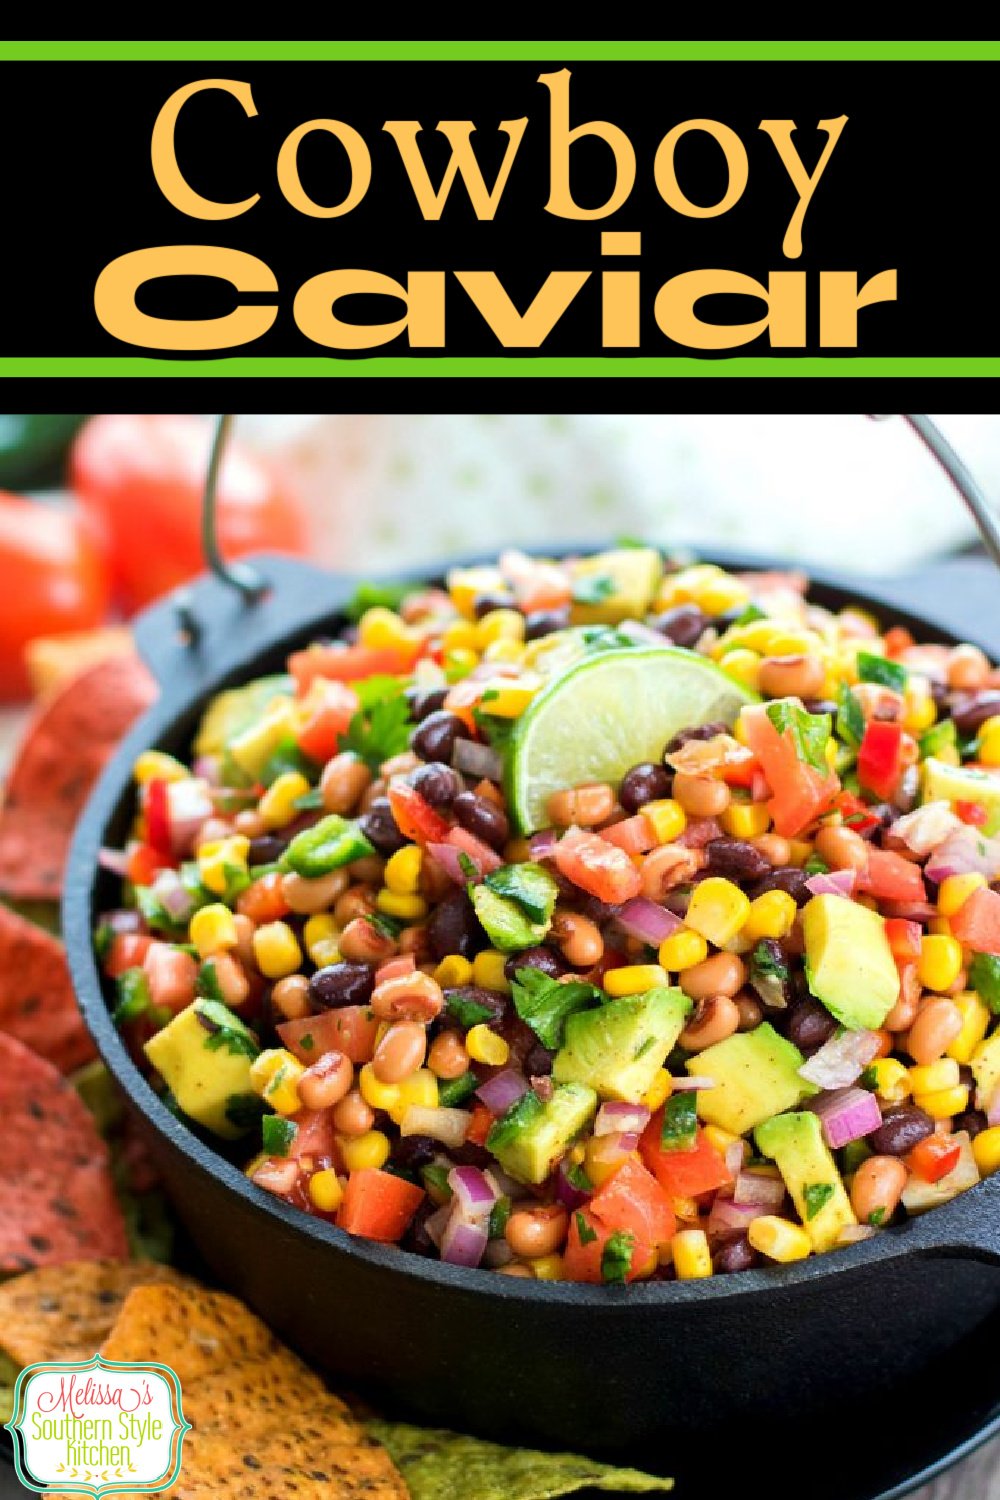 Serve this Cowboy Caviar as a party appetizer with tortilla chips for dipping or as a side dish and topping for salads and tacos #cowboycaviar #salsa #cornsalsa #cowboydip #corndip #southwesterncorndip #appetizers #cornandblackbeans #gamedayrecipes via @melissasssk